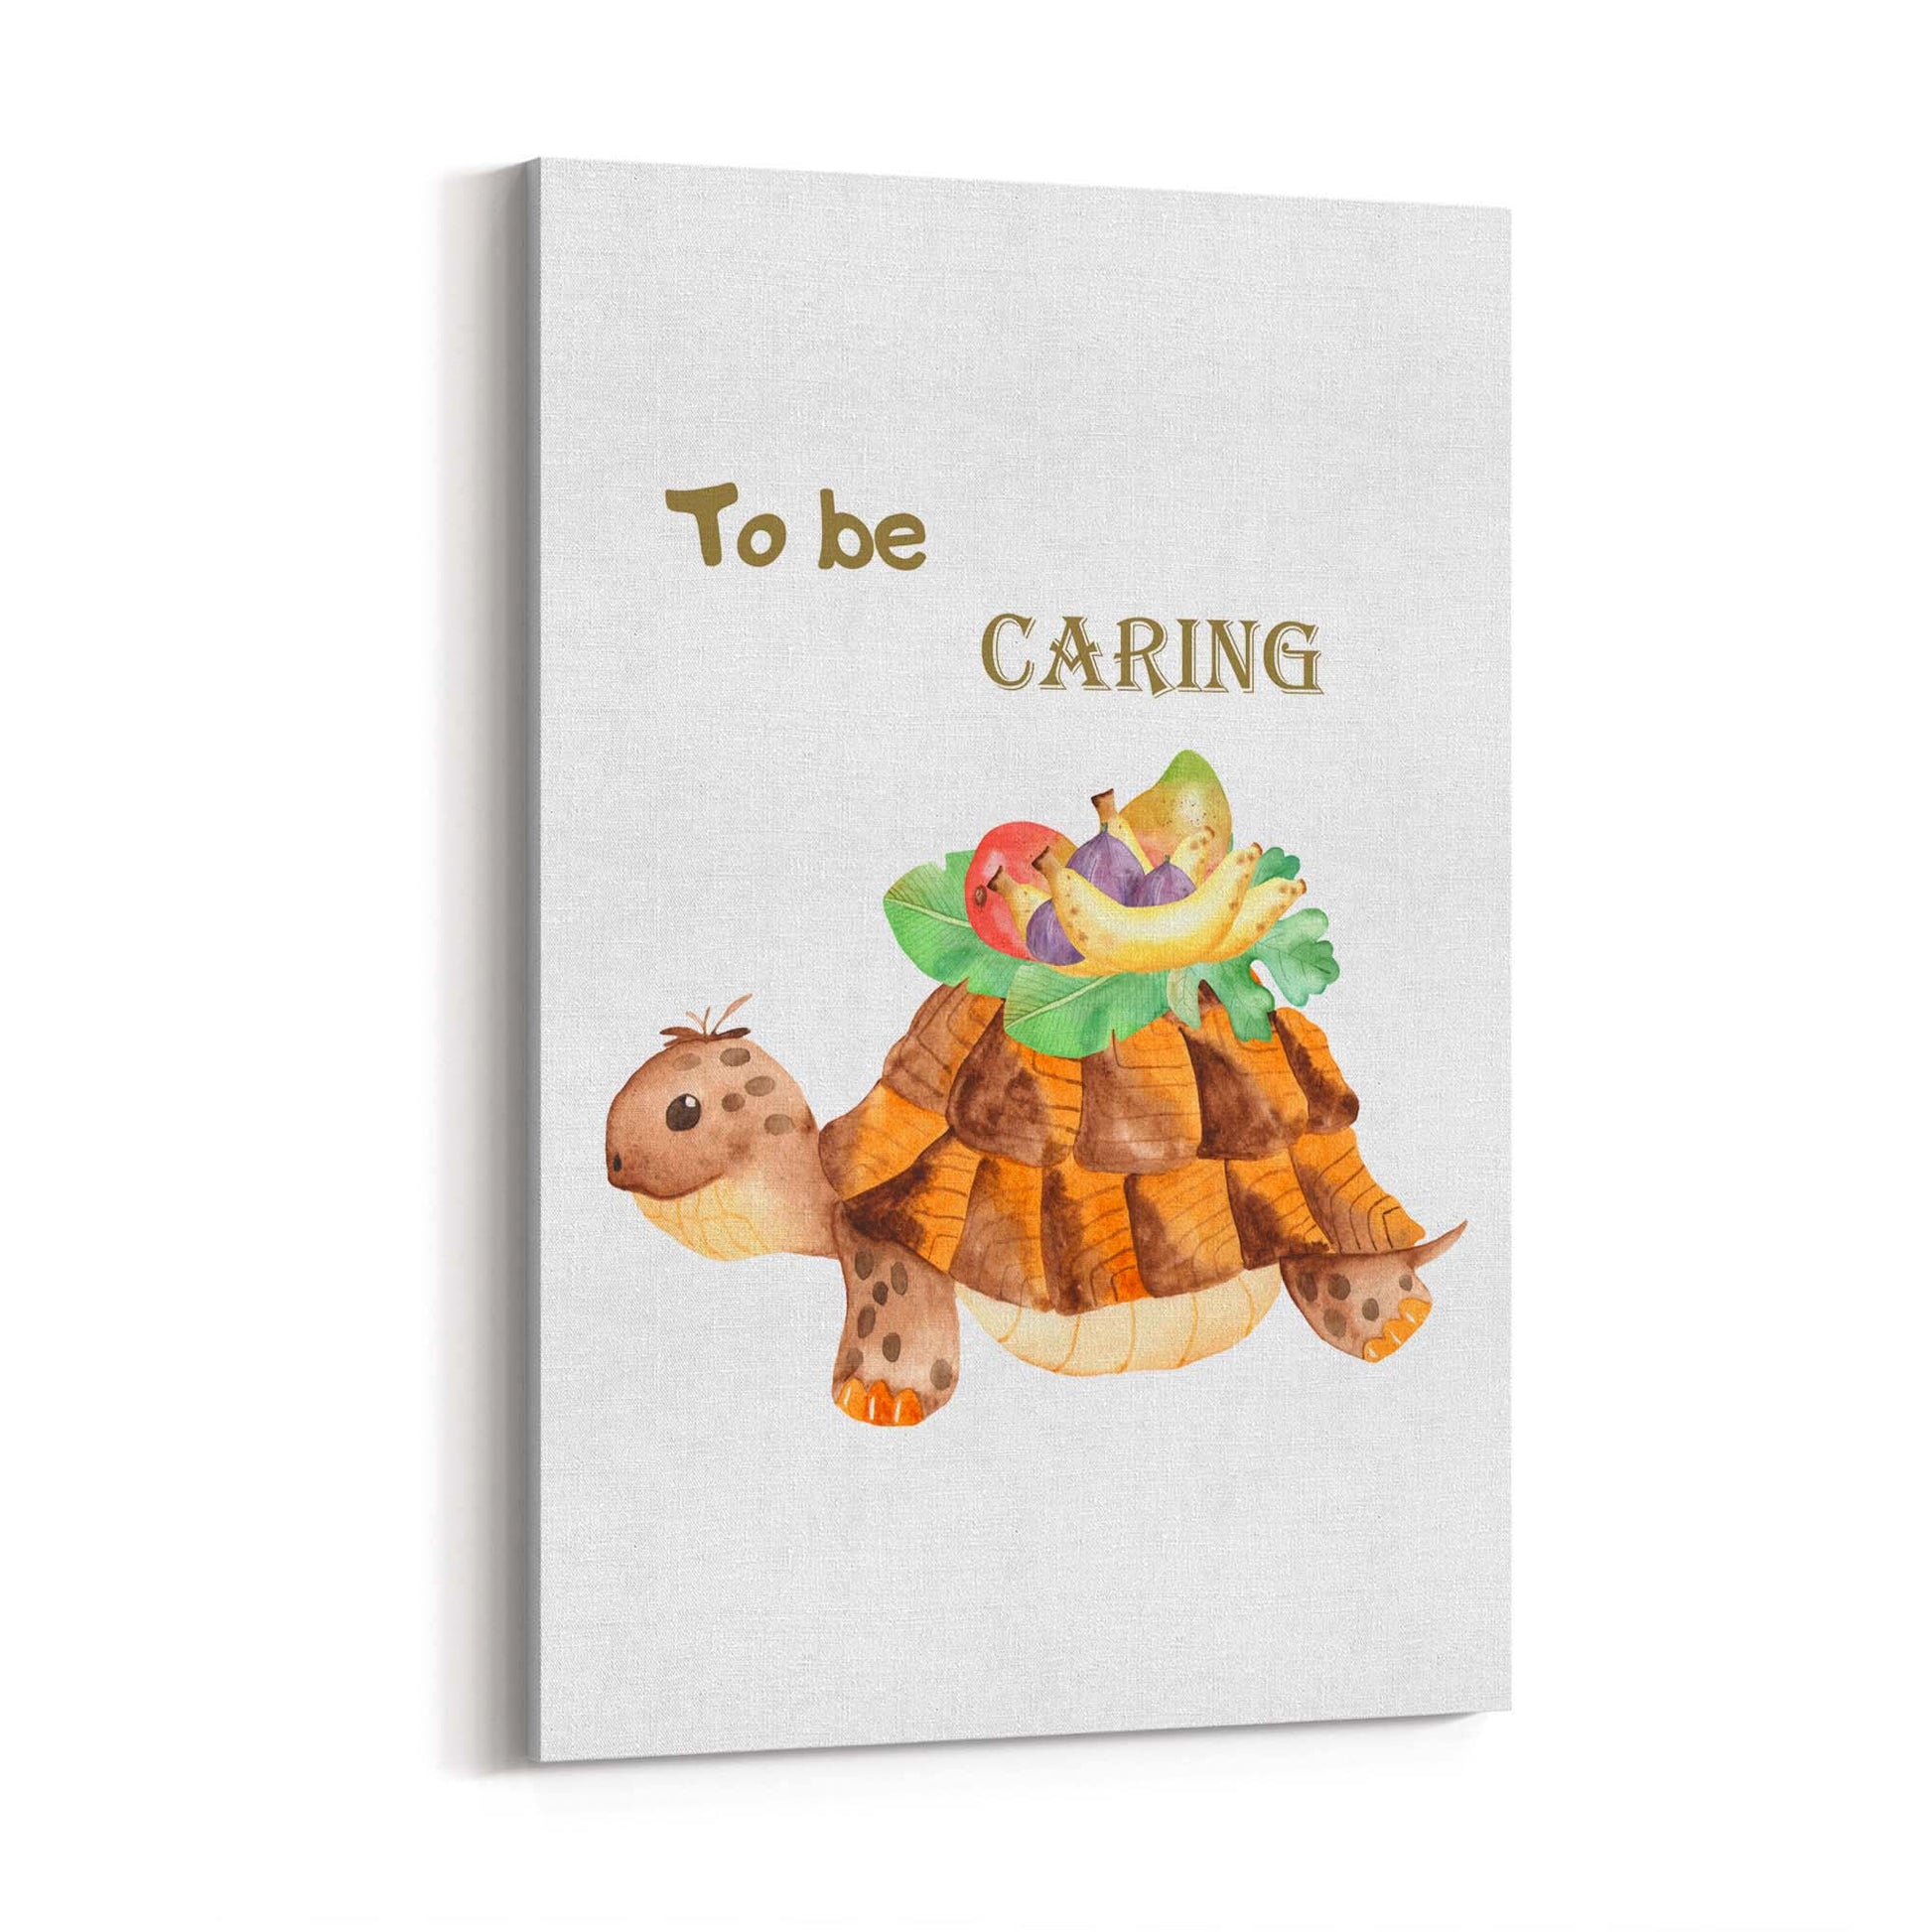 Tortoise "To Be Caring" Quote Nursery Wall Art - The Affordable Art Company